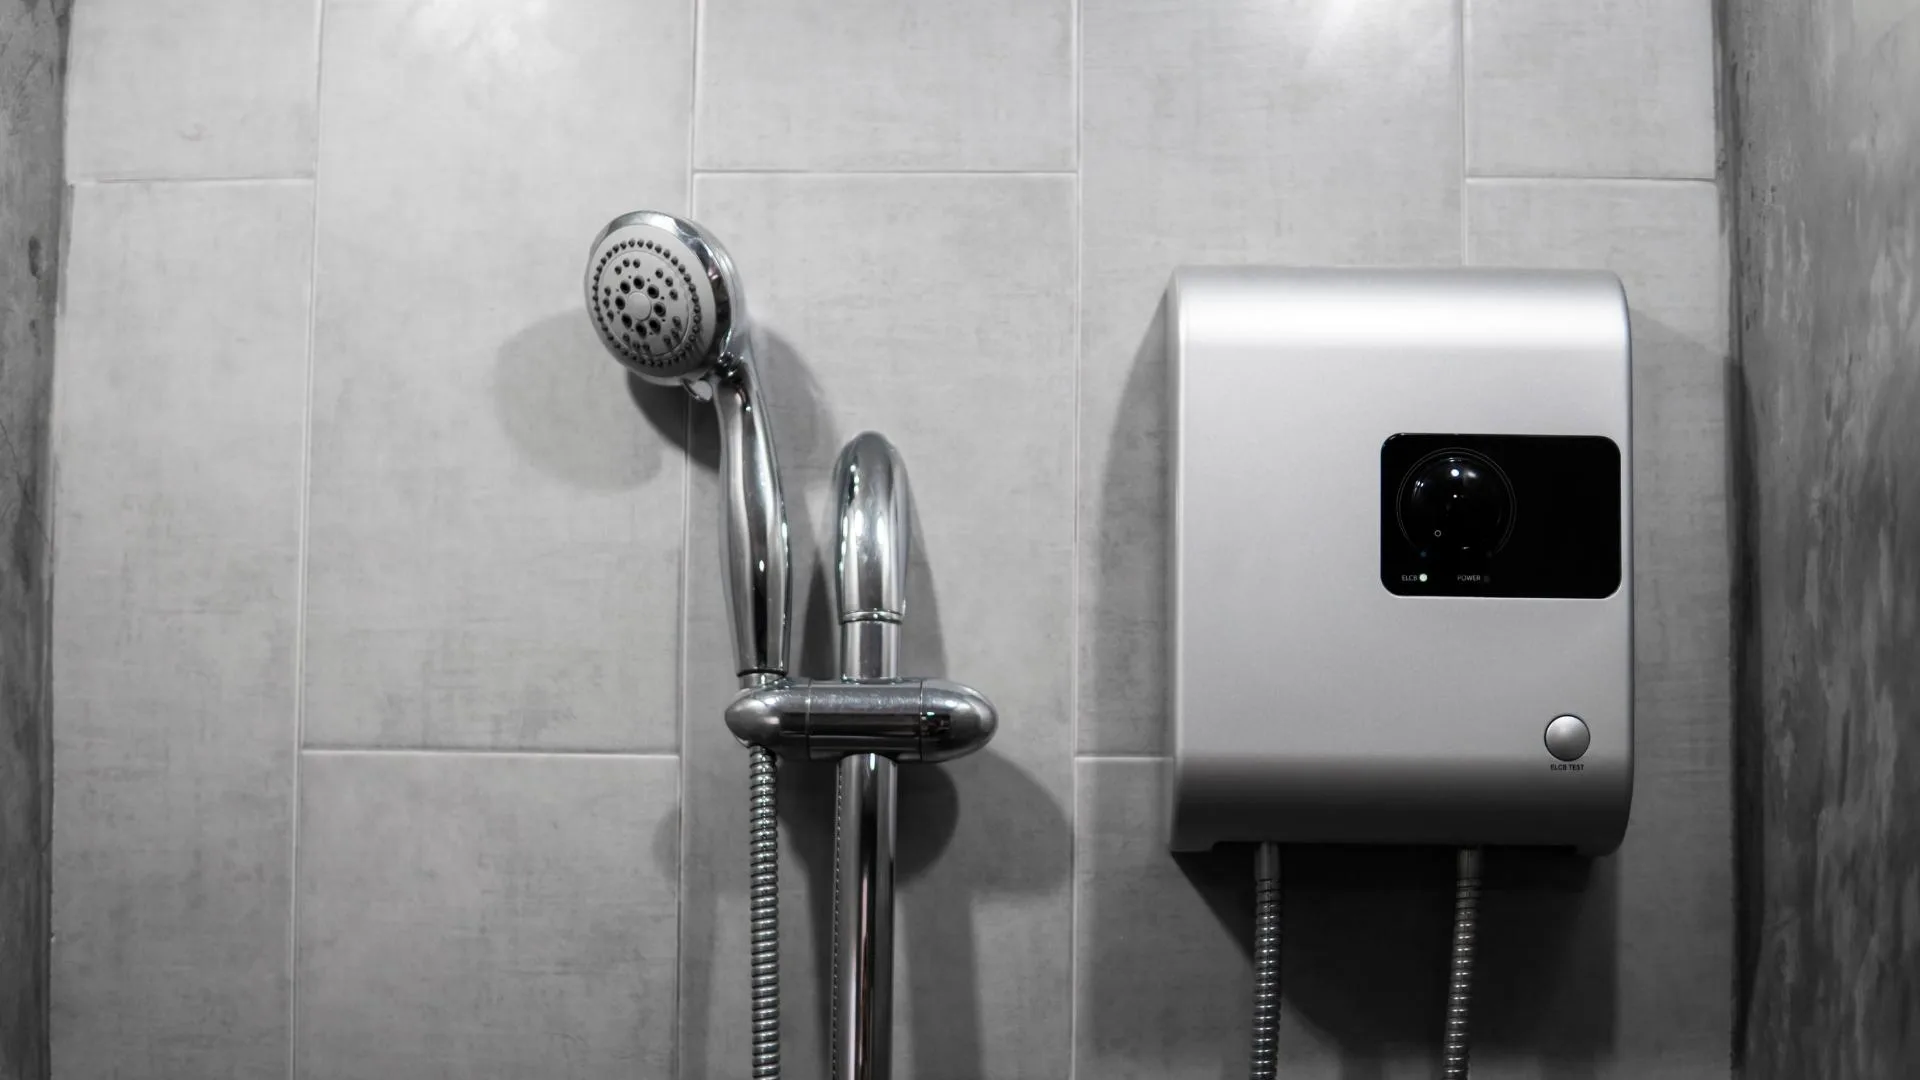 Photo of a tankless water heater and showerhead